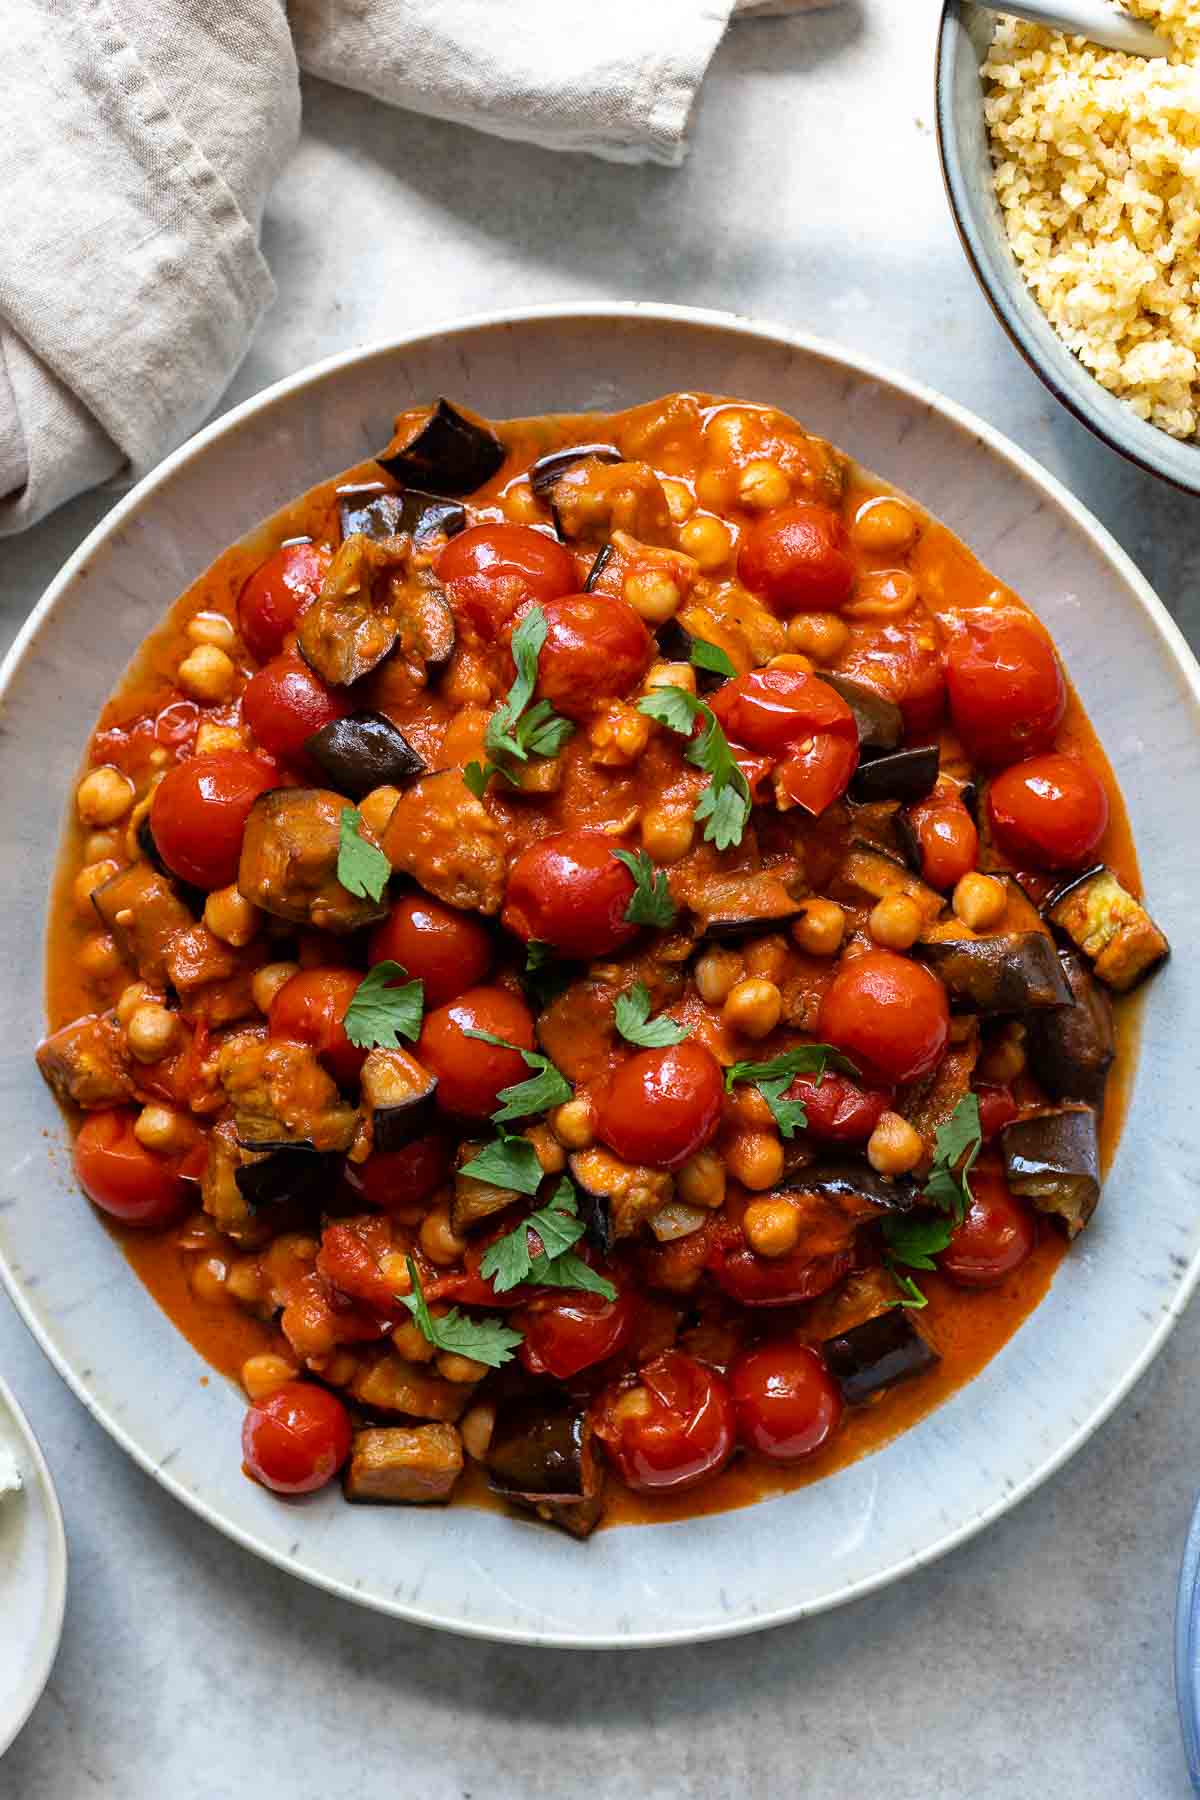 Eggplant and tomato stew with chickpeas